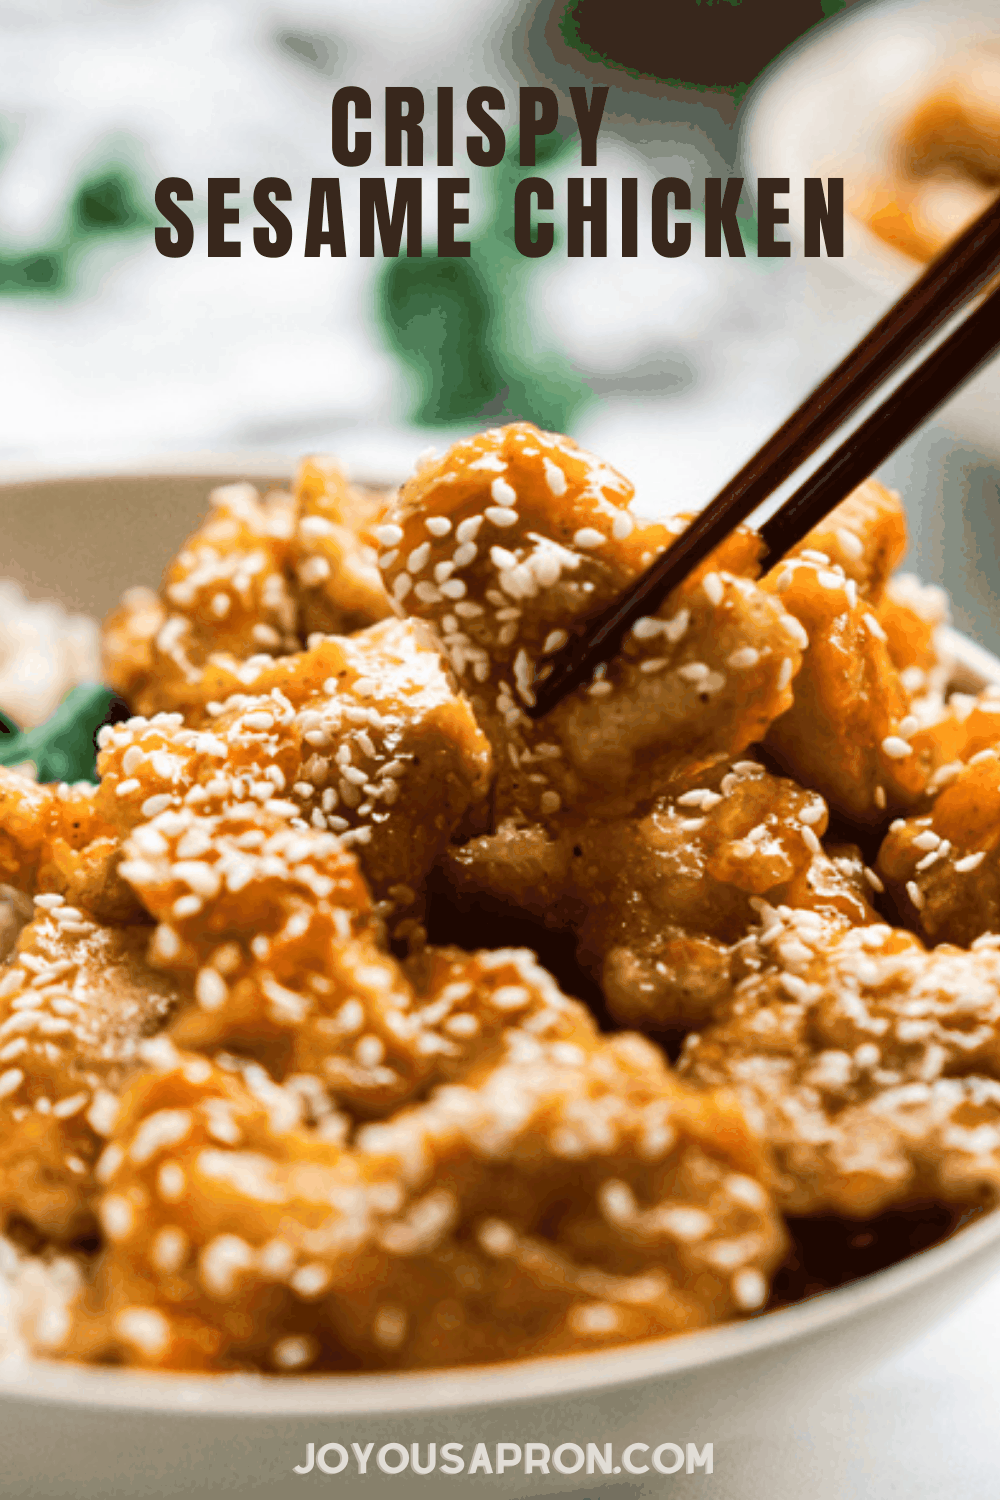 Sesame Chicken - Crispy breaded chicken coated in a sticky sweet Asian inspired Honey Sesame Sauce. This chicken recipe is easy, delicious, and much healthier than Chinese takeout! via @joyousapron